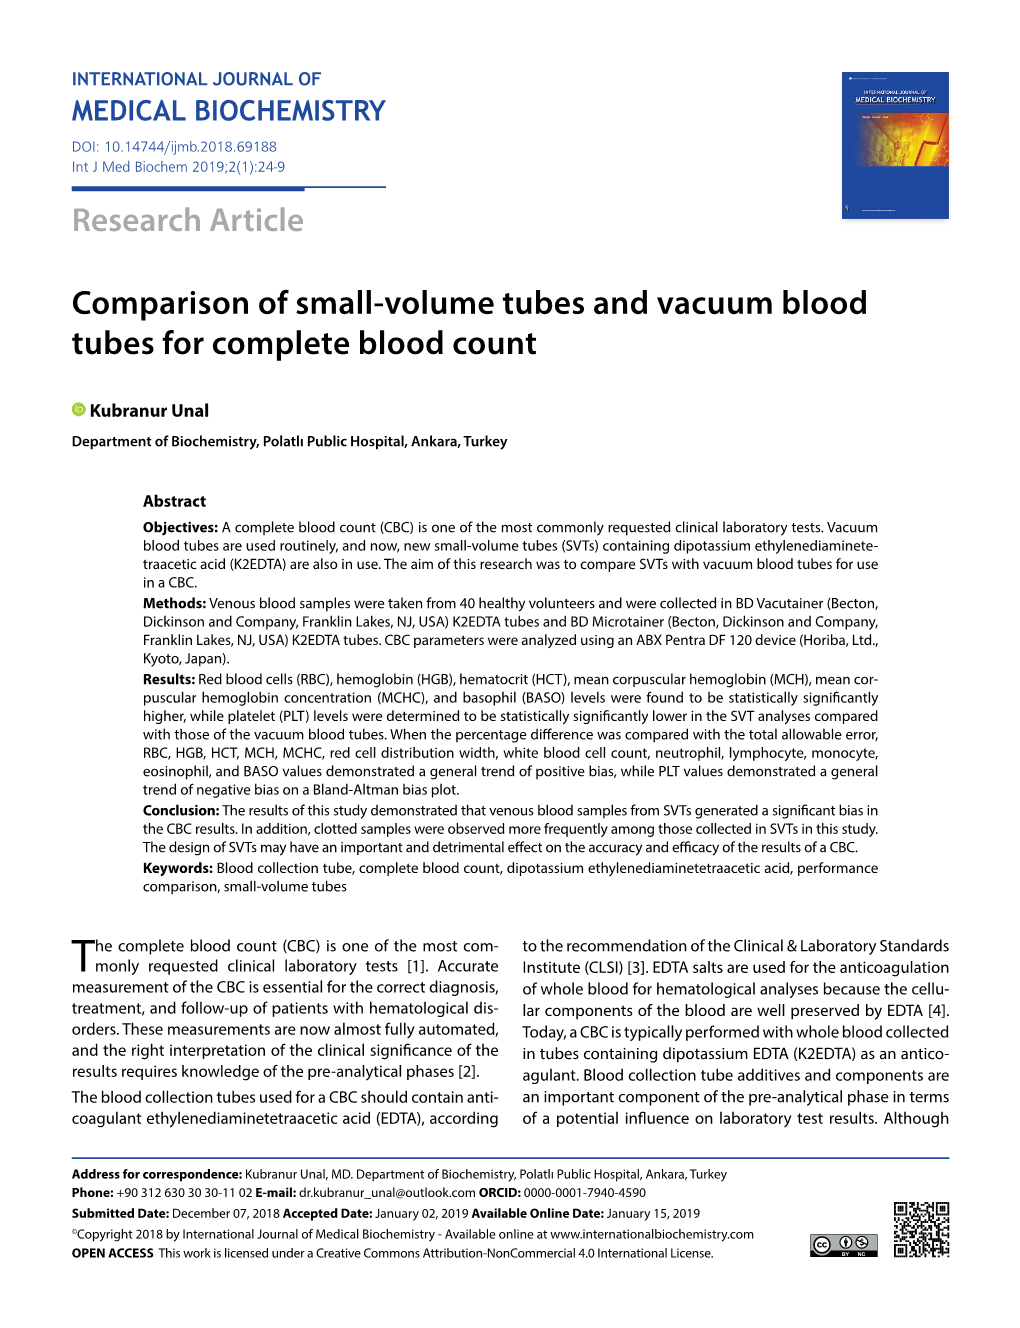 Research Article Comparison of Small-Volume Tubes and Vacuum